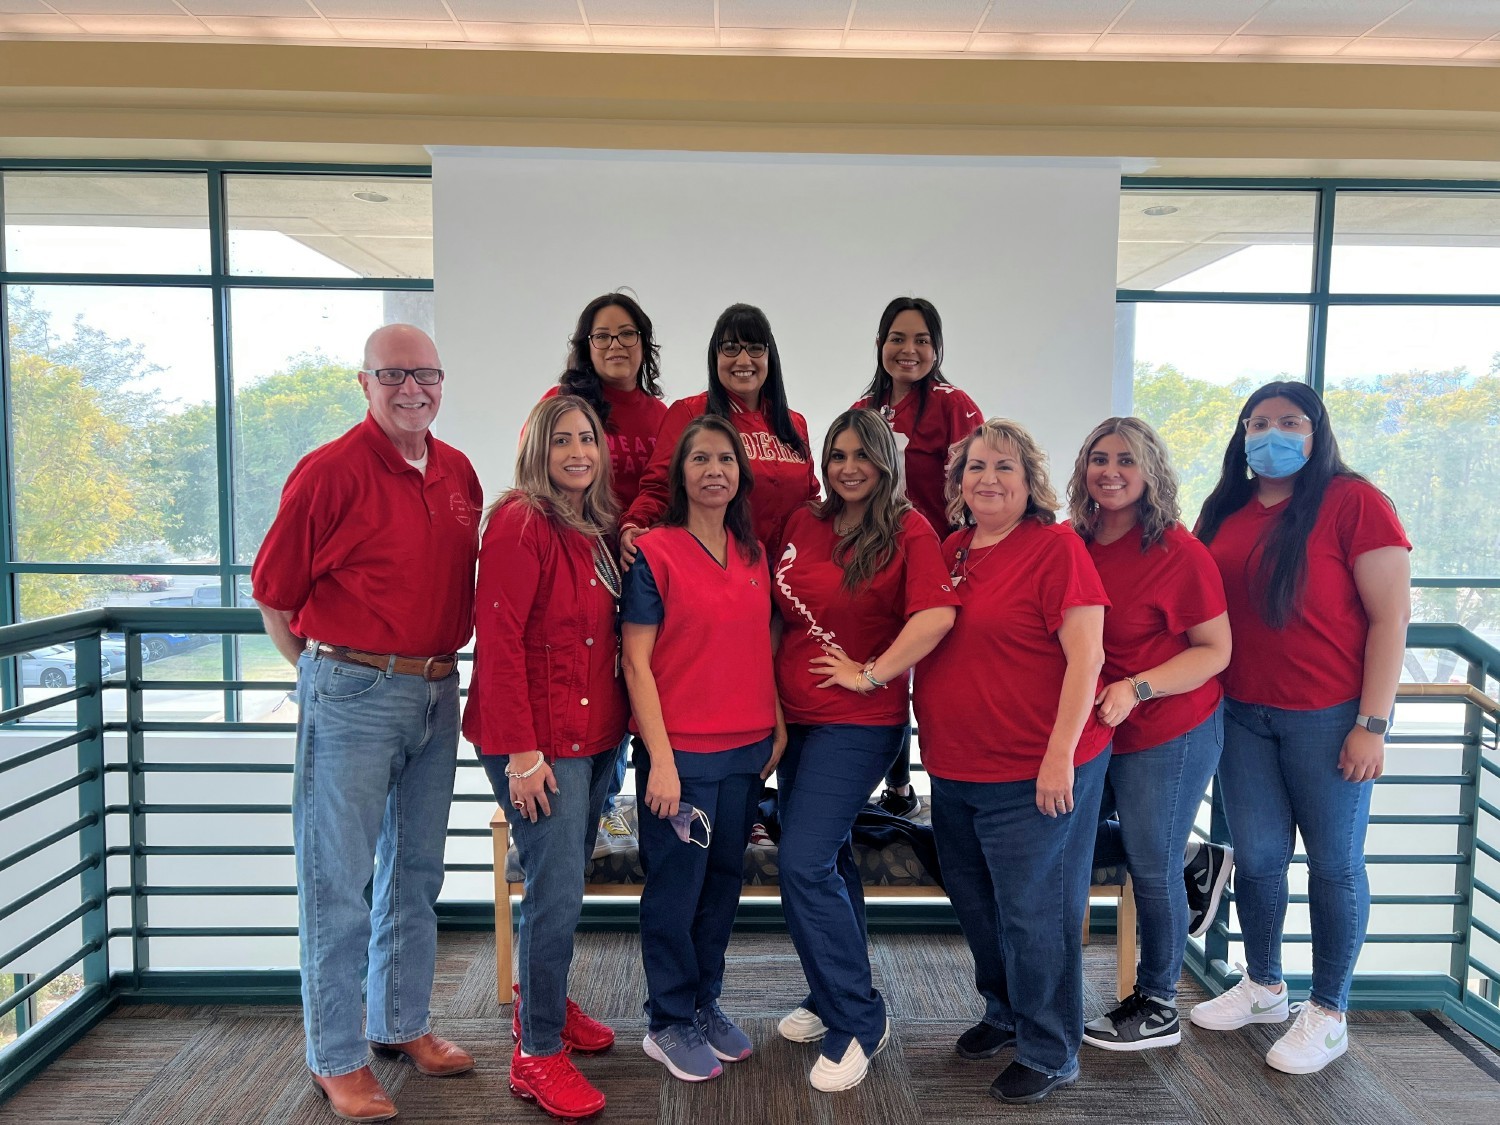 Wear Red Day in honor of Heart Health month